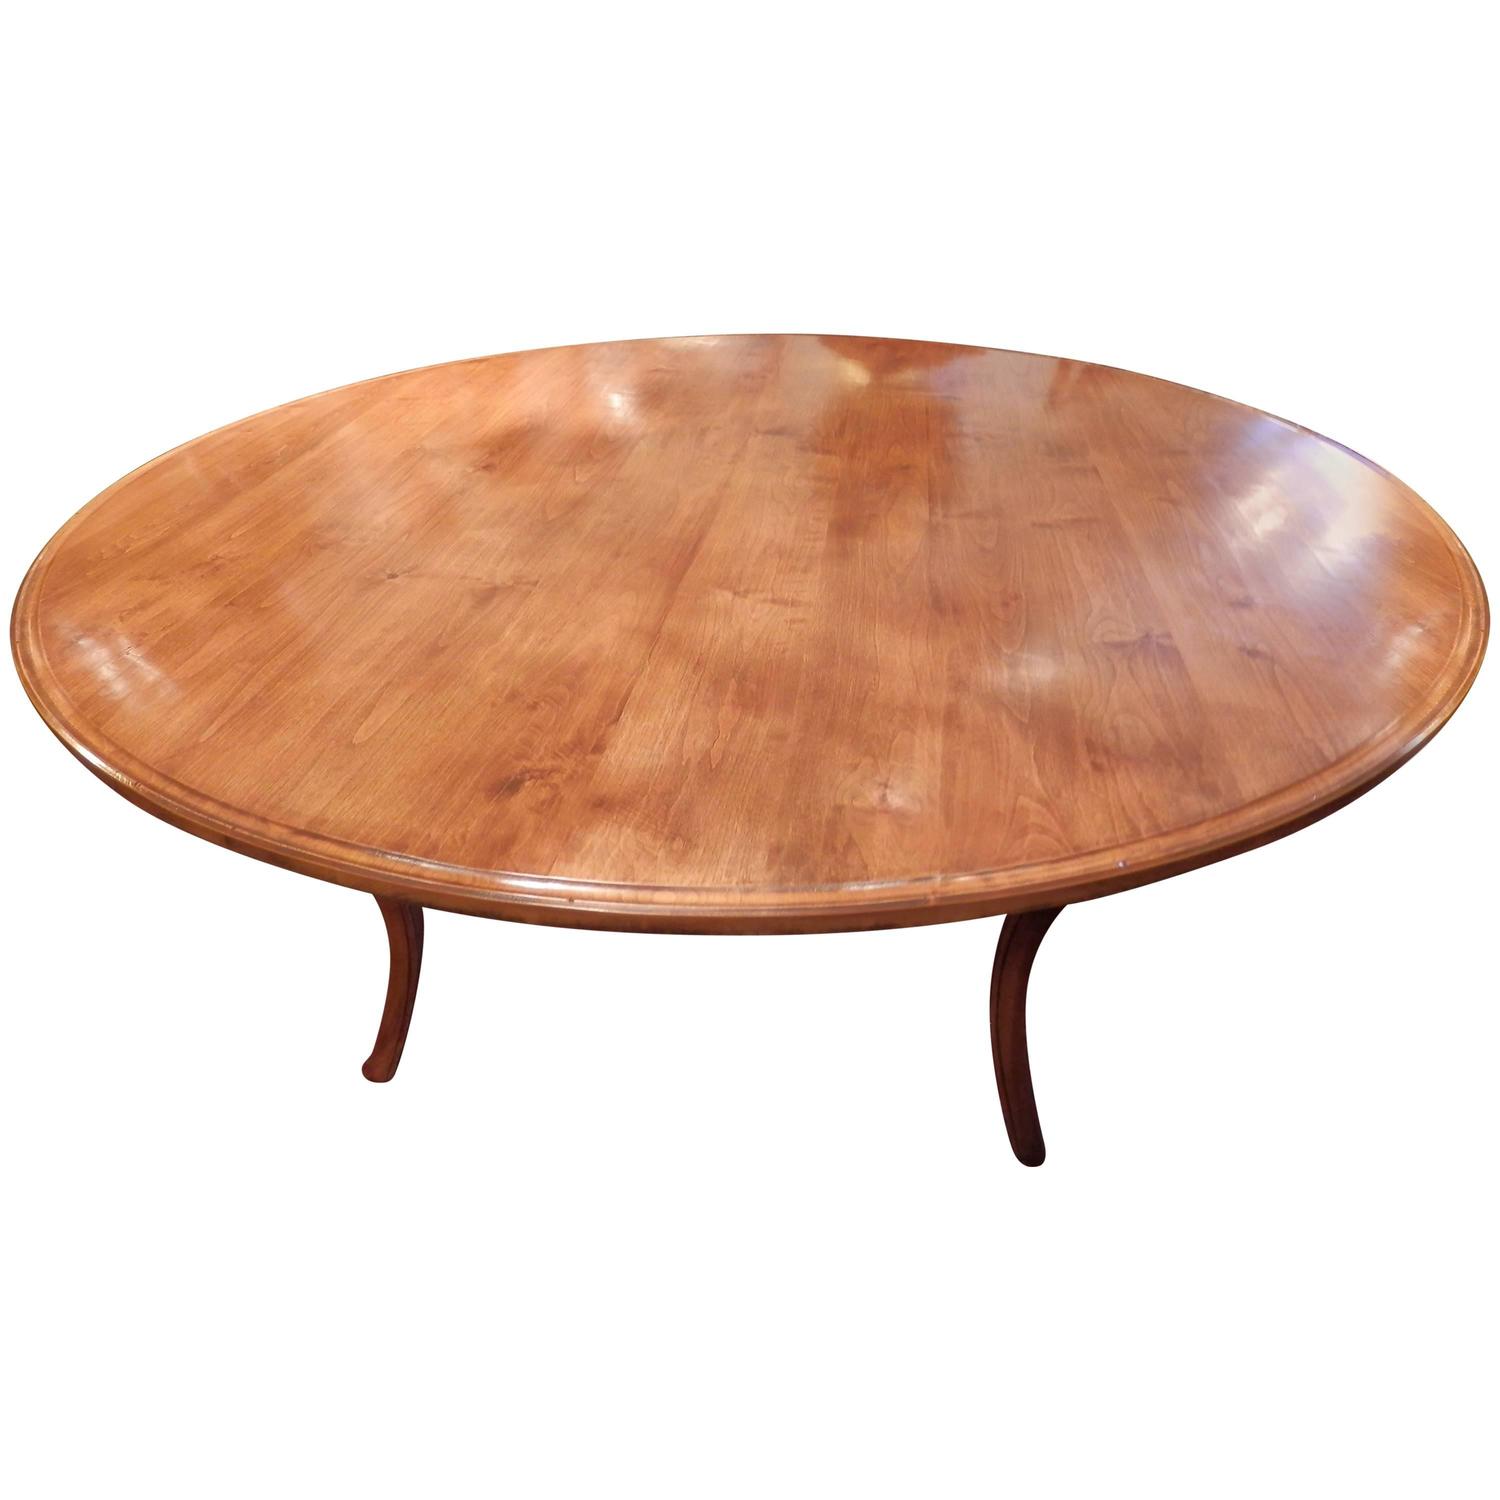 Late 19th Fine French Round Dining Table at 1stdibs